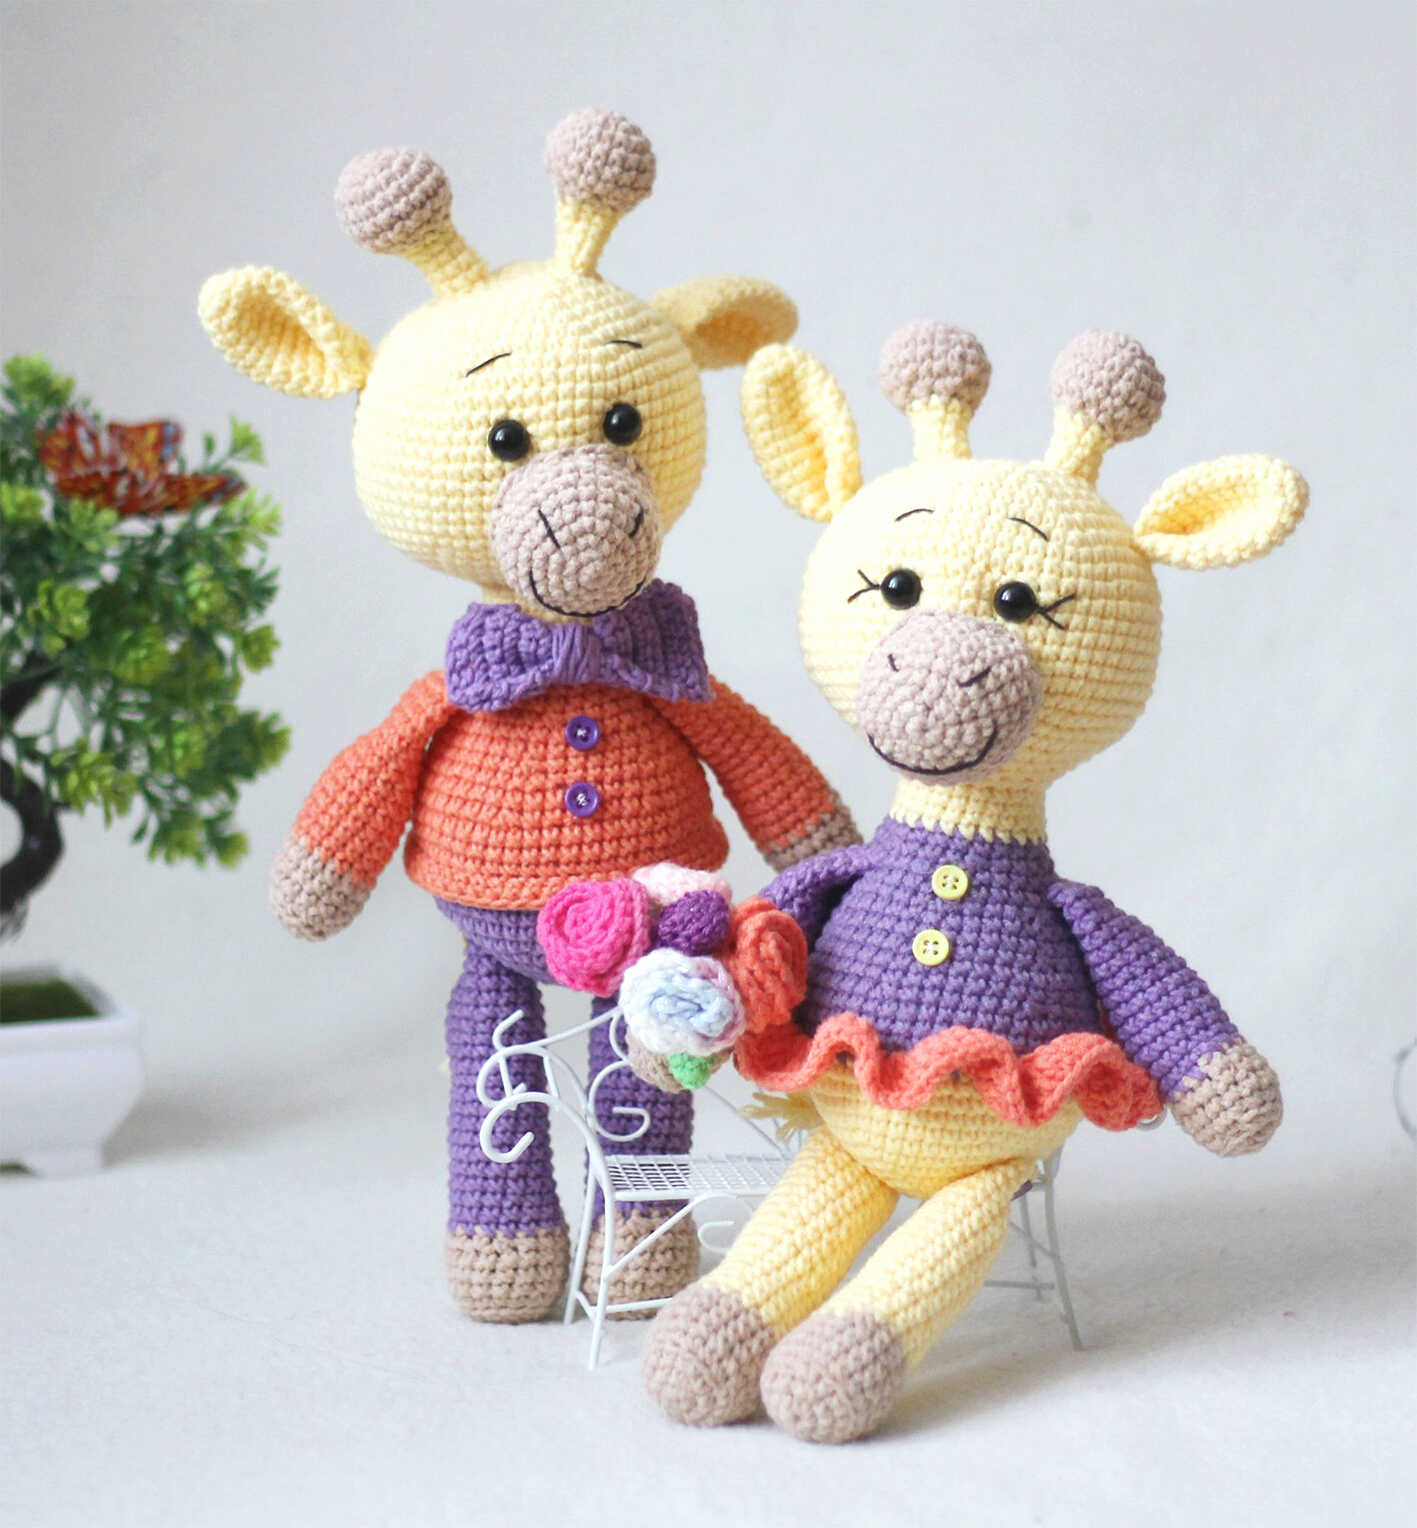 Free Pattern for a Family of Amigurumi Giraffes